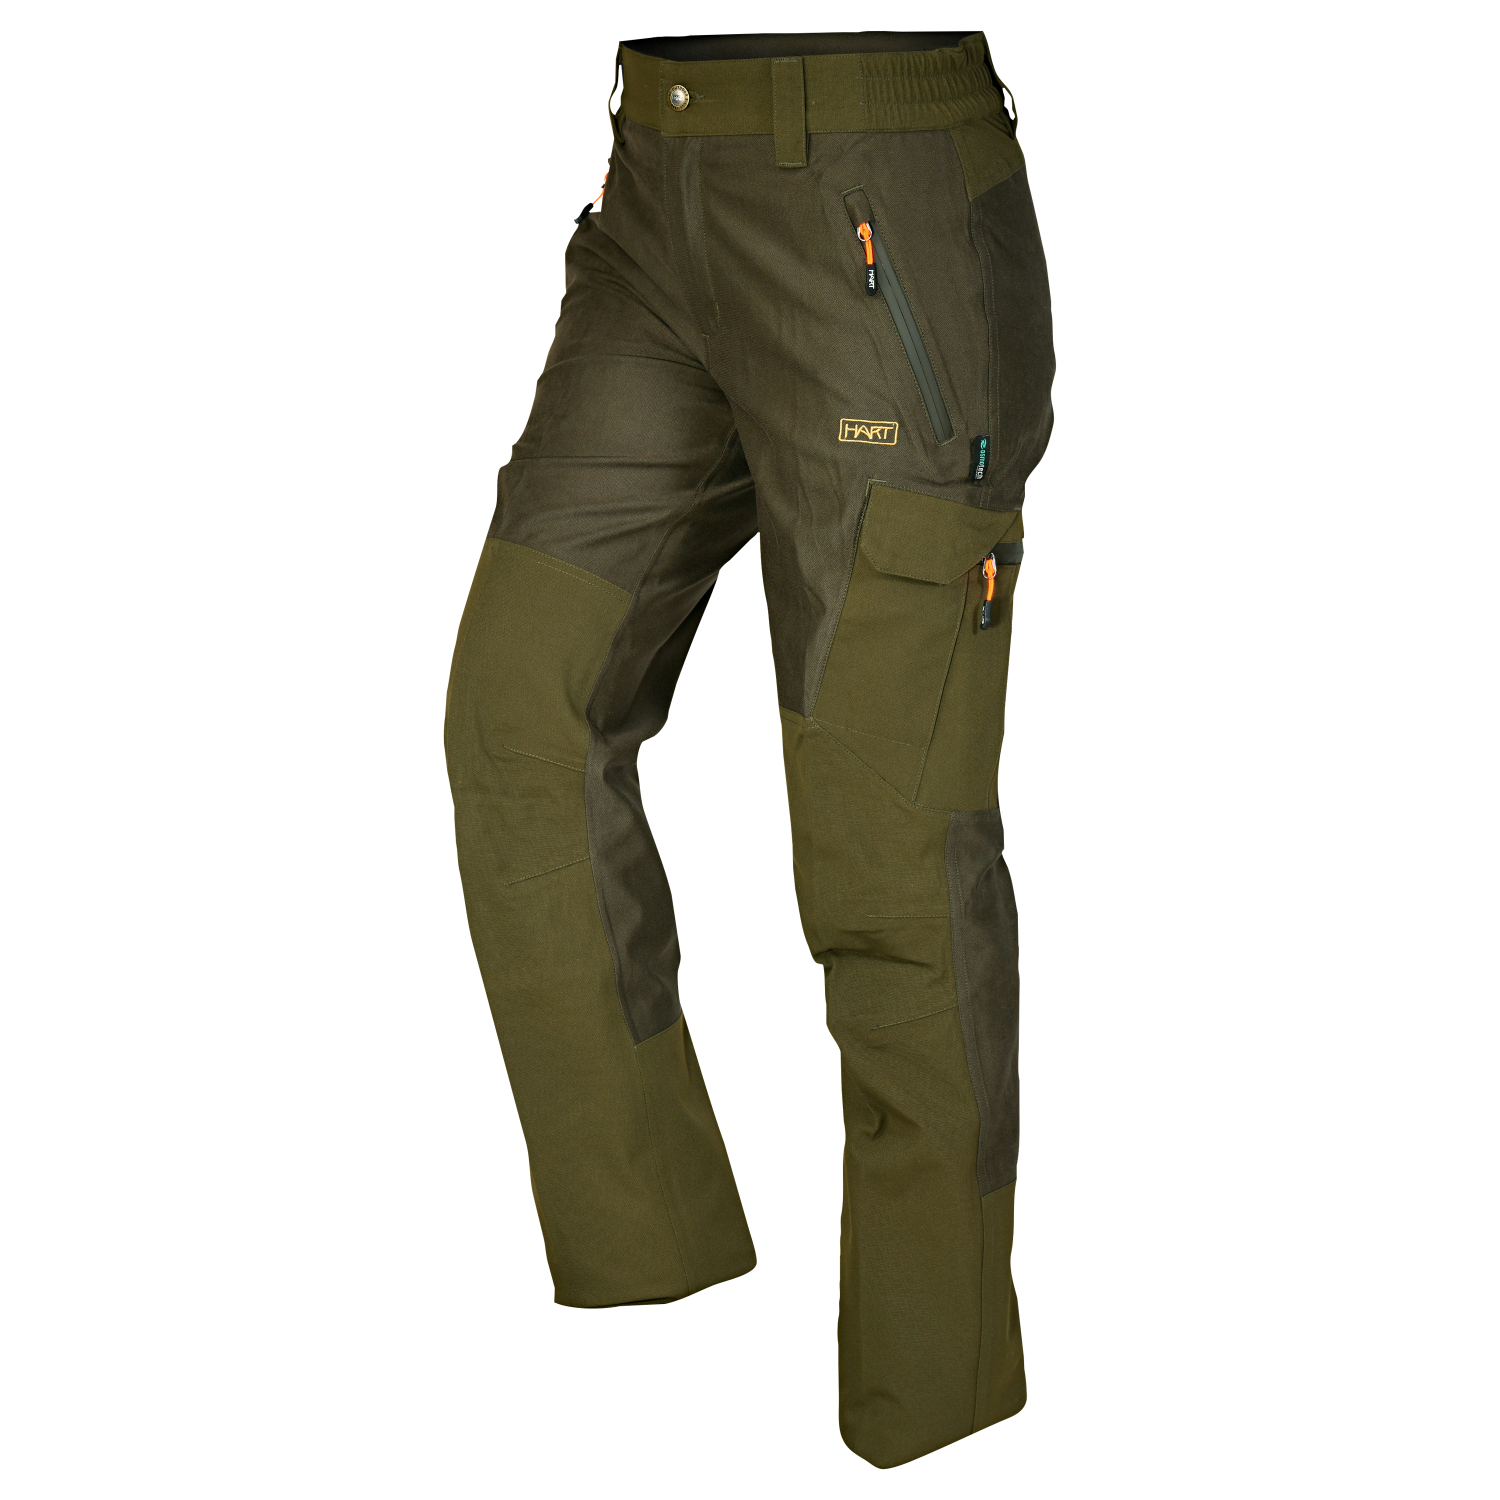 Hart Womens Hunting Trousers Taunus at low prices